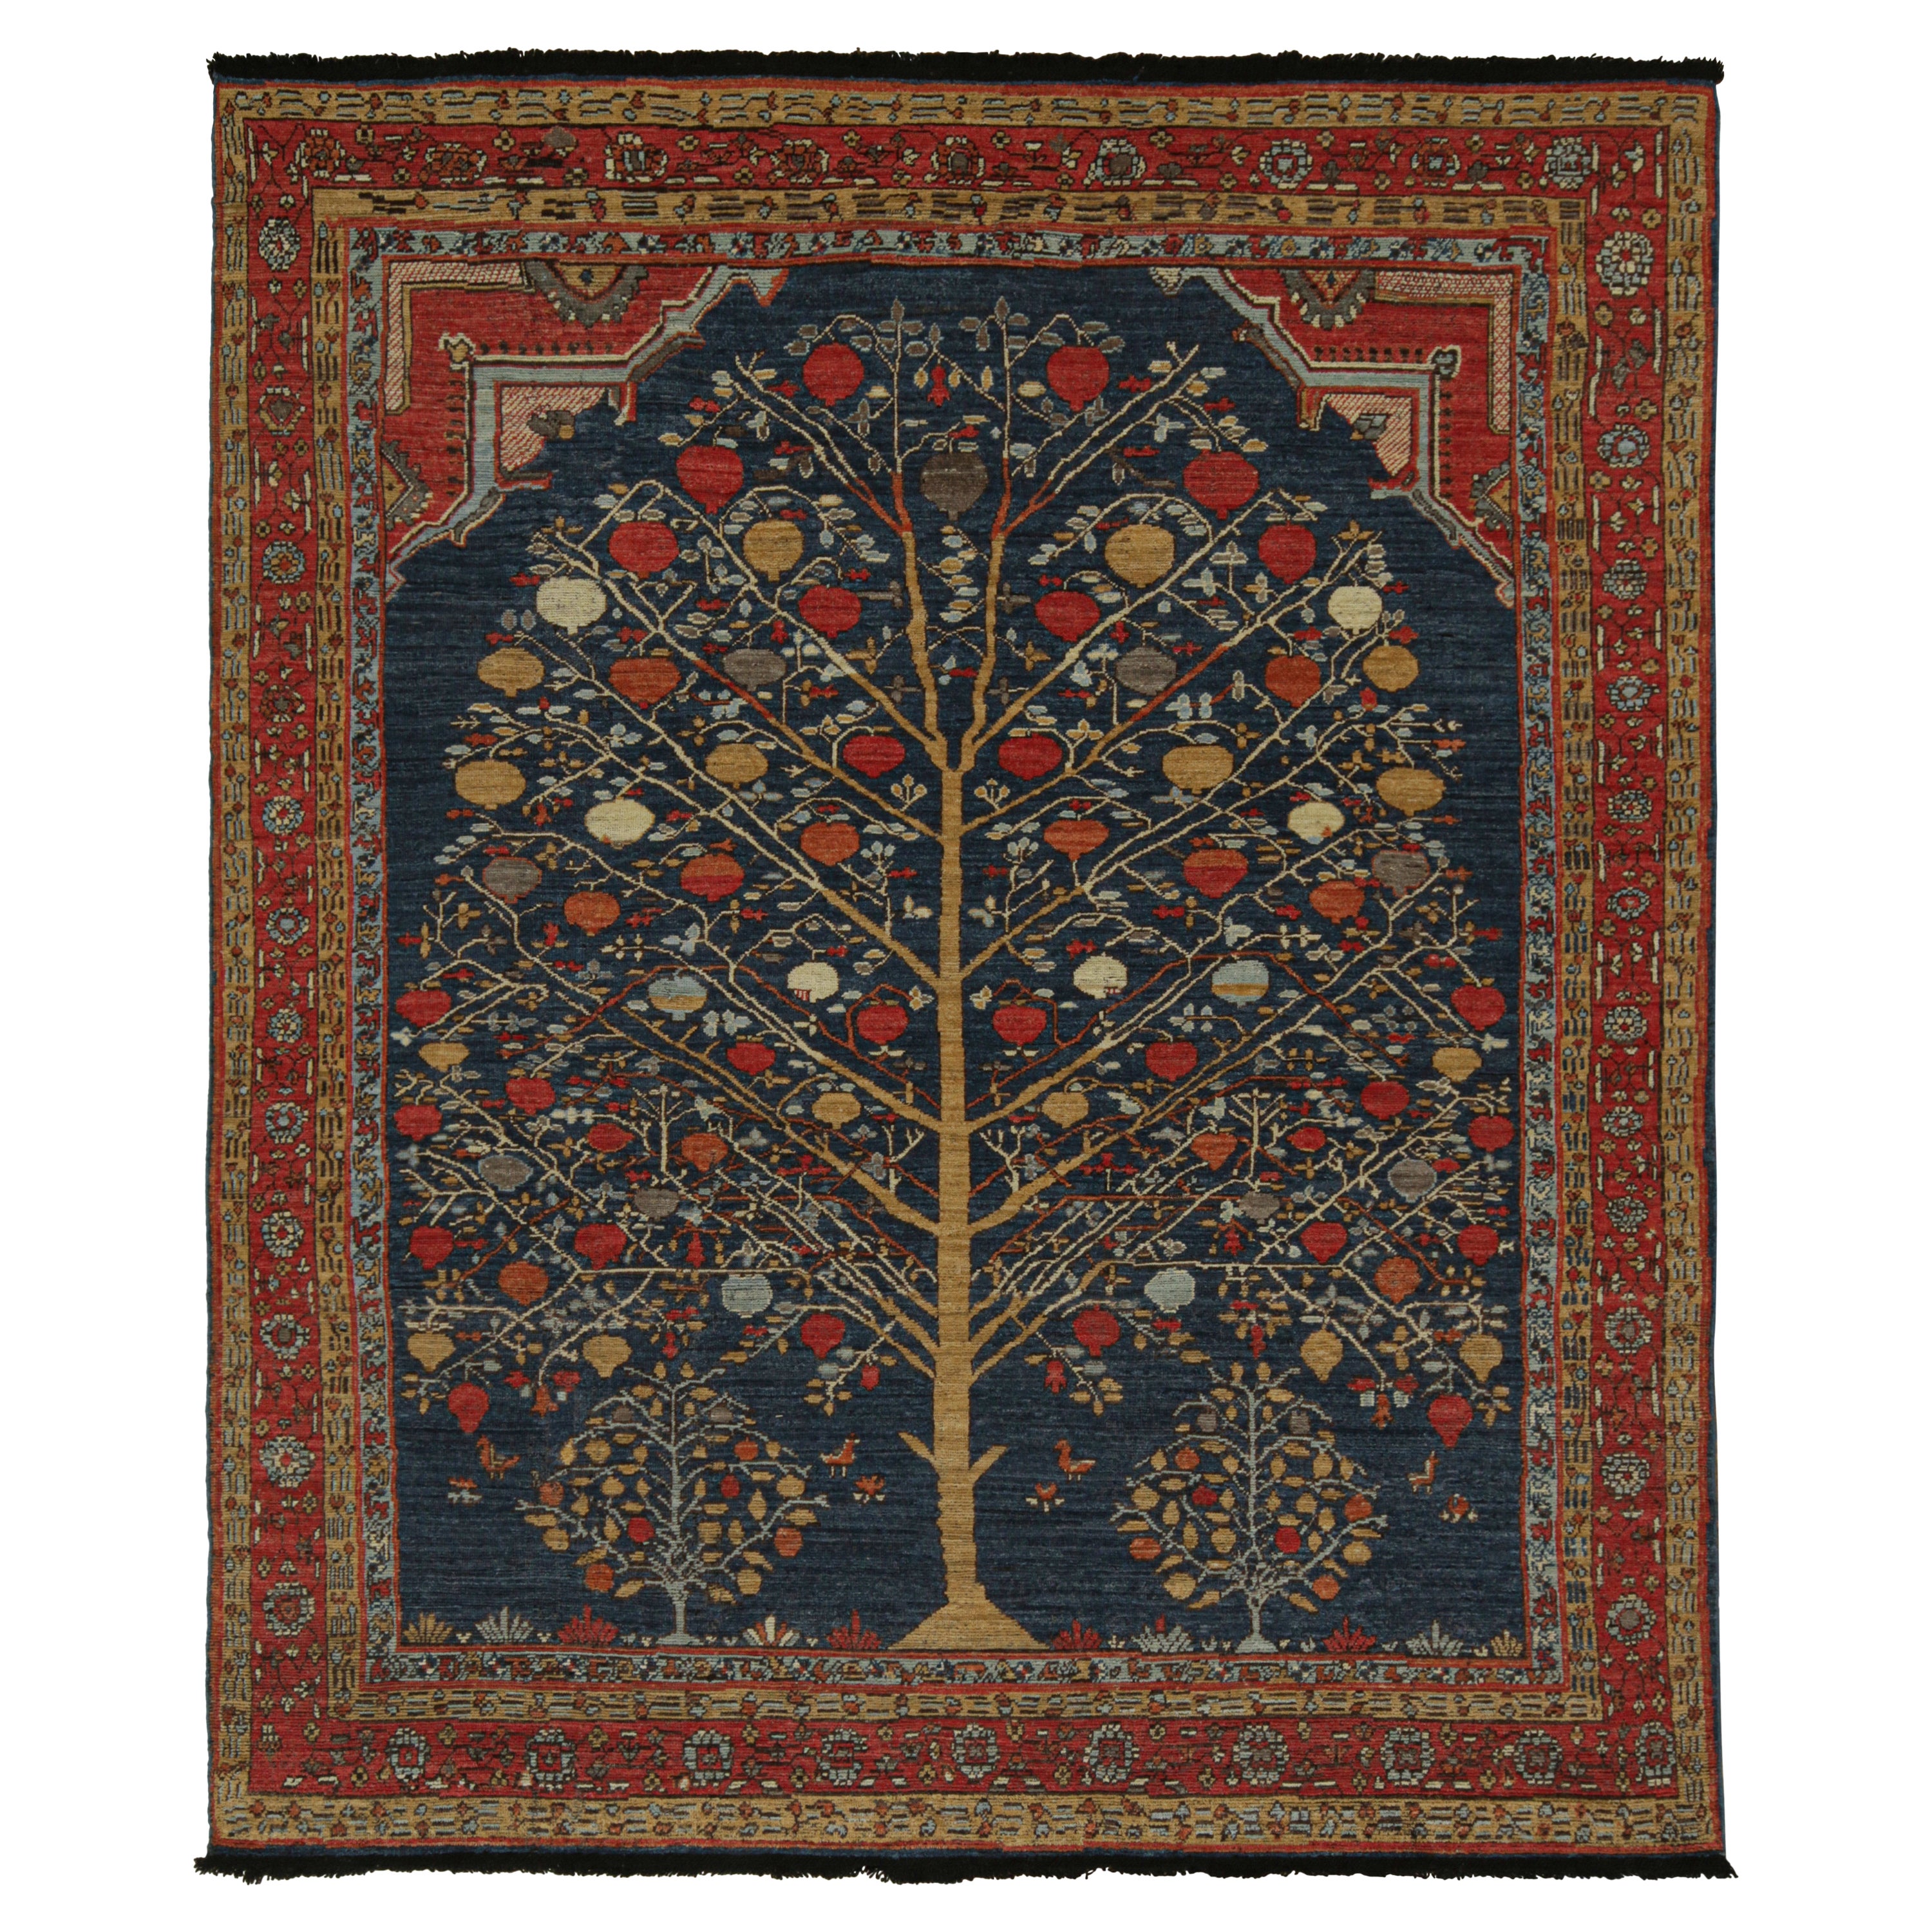 Rug & Kilim’s Antique Persian Style Rug In Red, Blue & Gold Pictorials For Sale